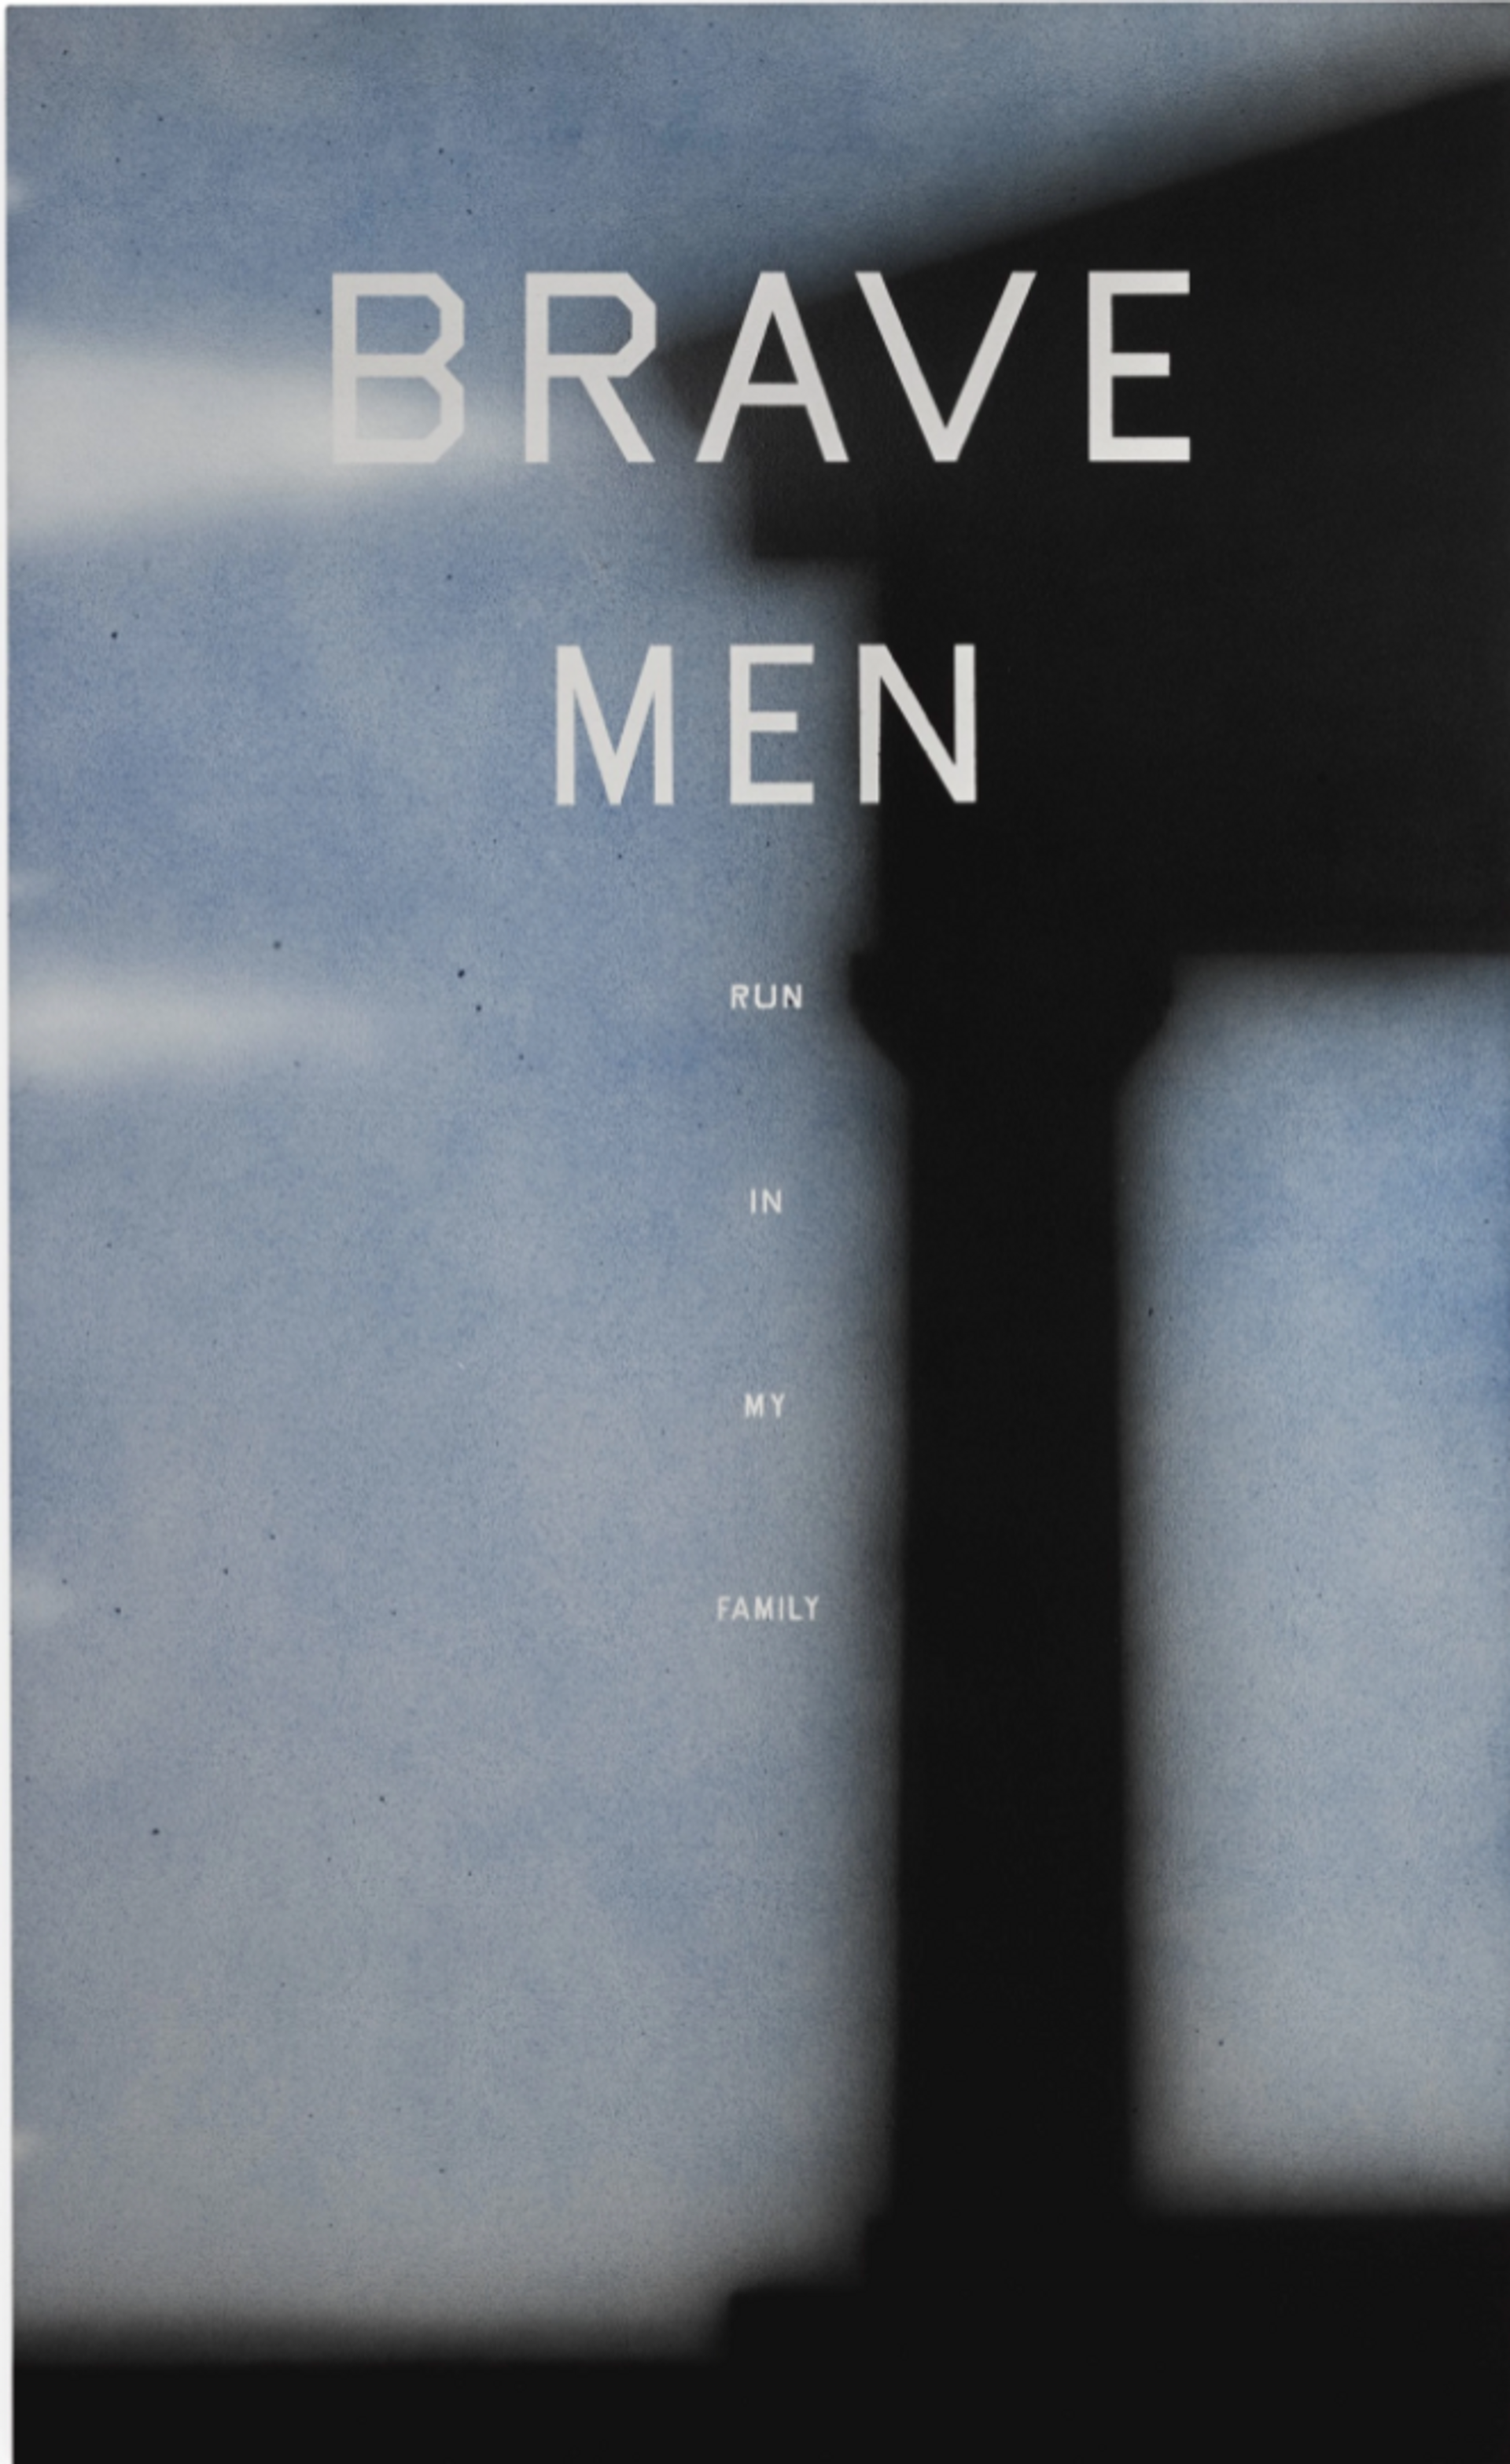 Brave Man's Porch by Ed Ruscha 